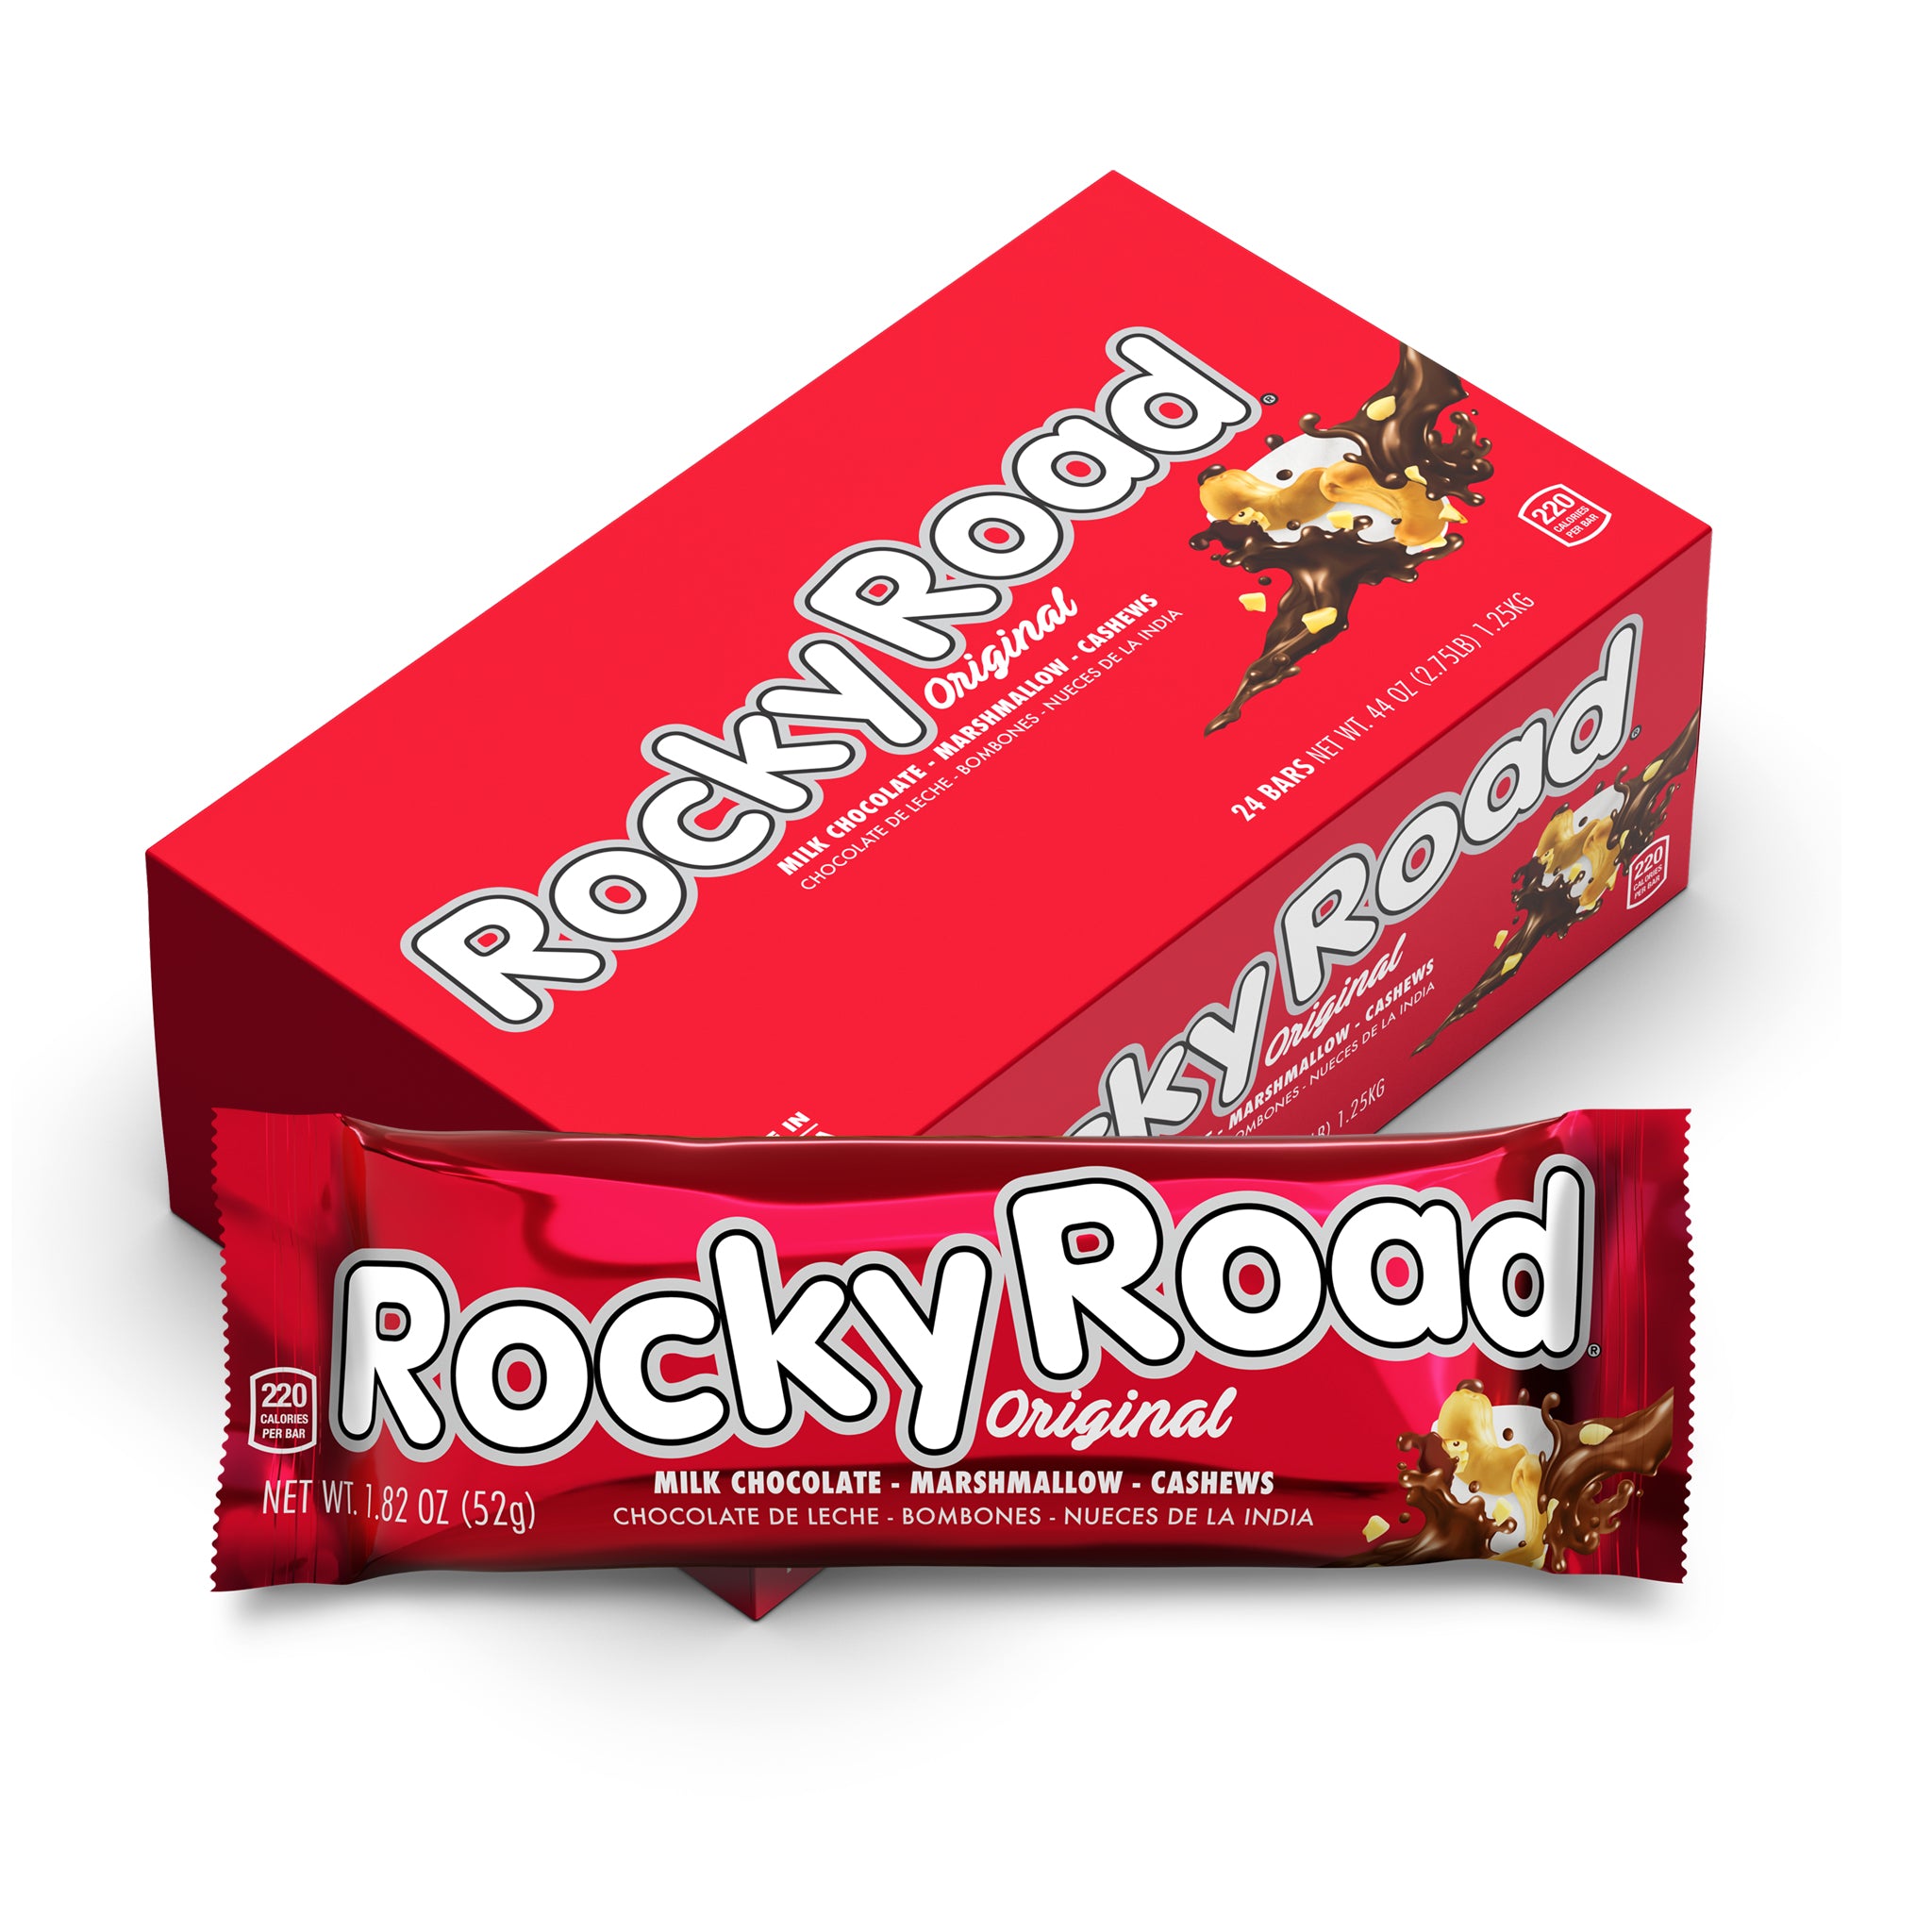 ROCKY ROAD® ORIGINAL 24CT. BOX - Annabelle Candy Company